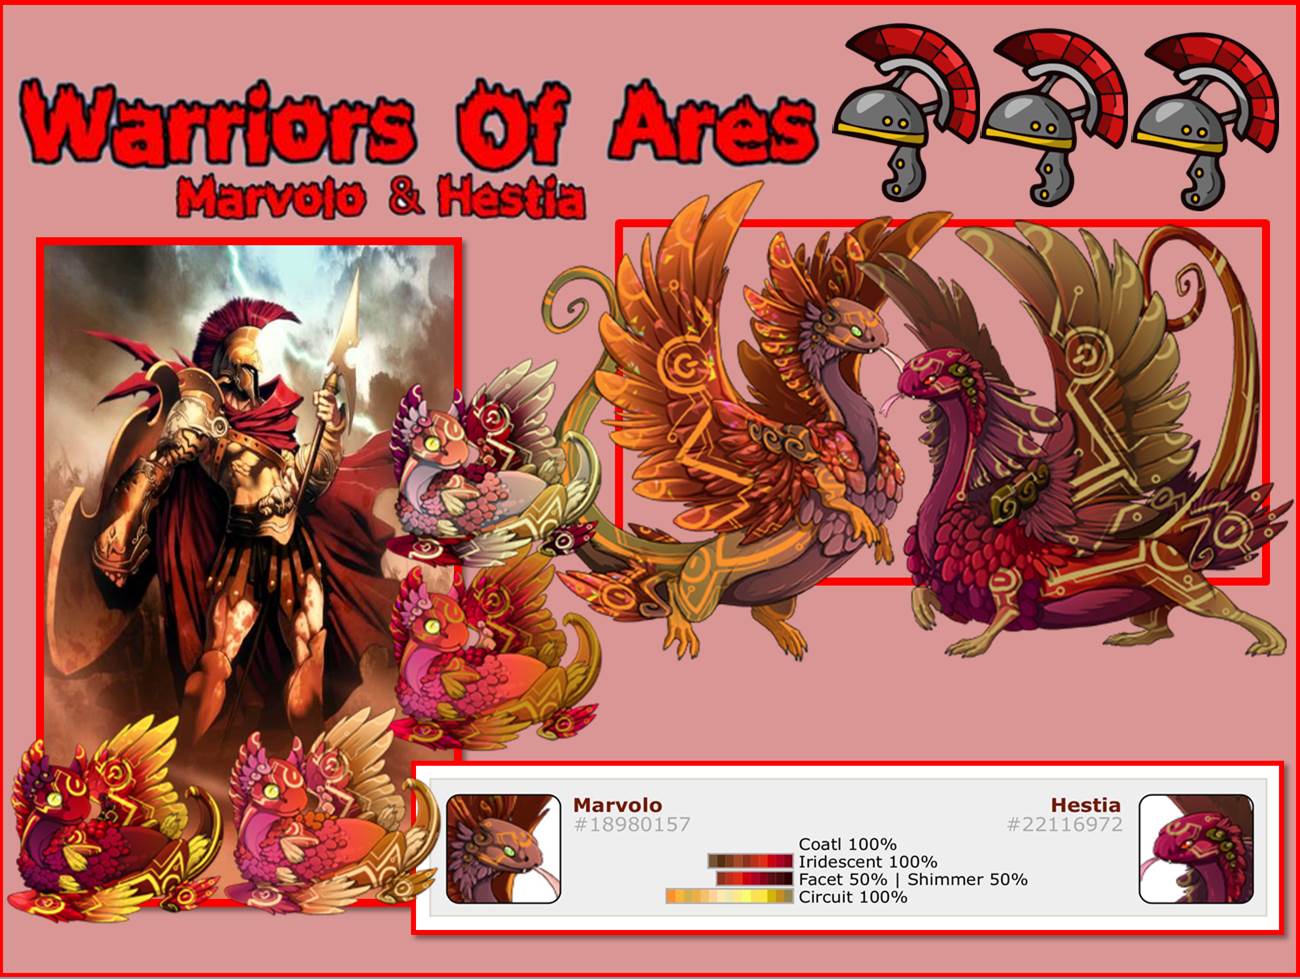 warriors_of_ares_by_dcho0320-dbfwrw6.jpg